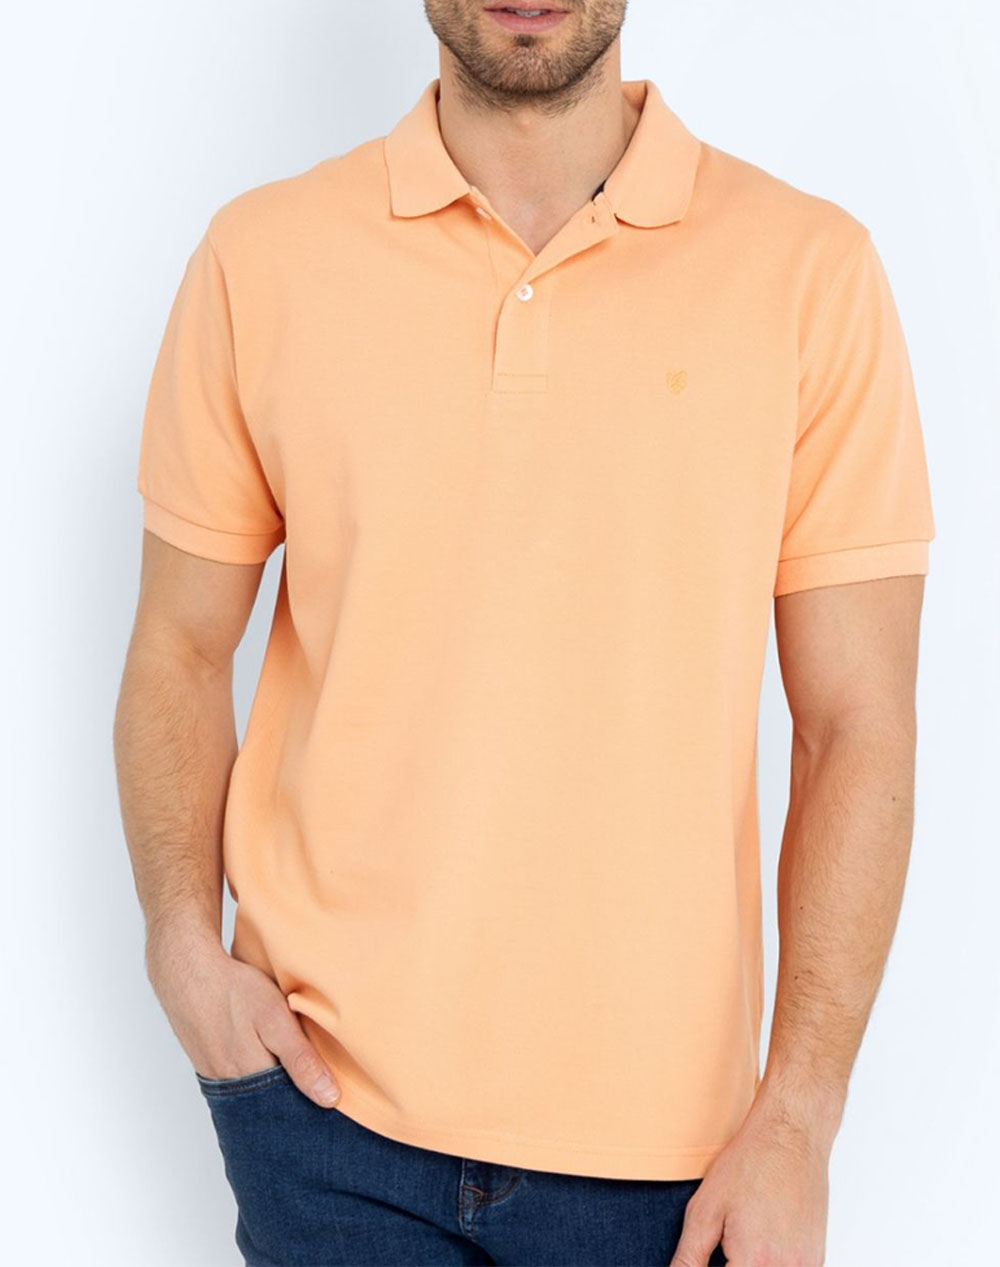 THE BOSTONIANS ΜΠΛΟΥΖΑ POLO PIQUE REGULAR FIT 3PS0001-SALMON Coral 3820ABOST3410092_XR13882